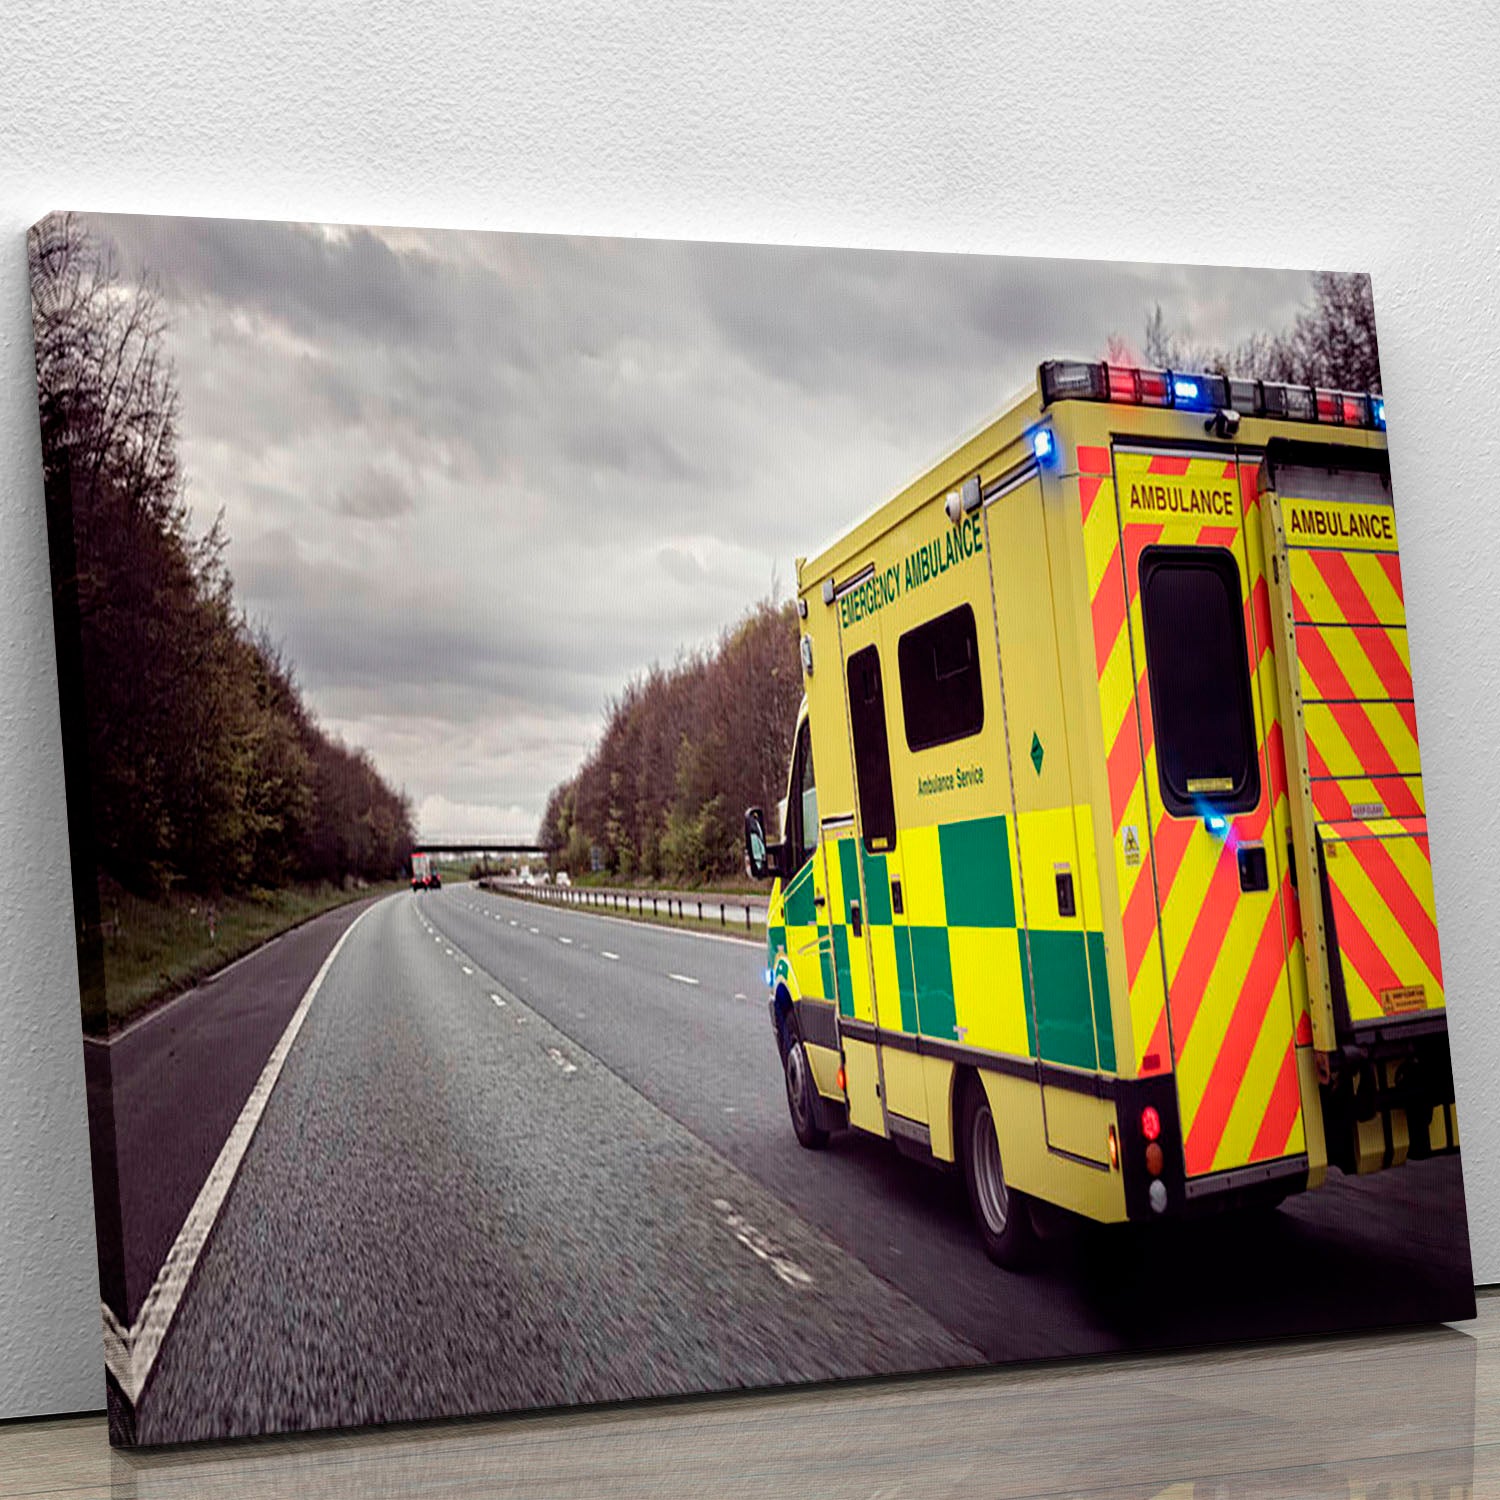 Ambulance responding to an emergency Canvas Print or Poster - Canvas Art Rocks - 1